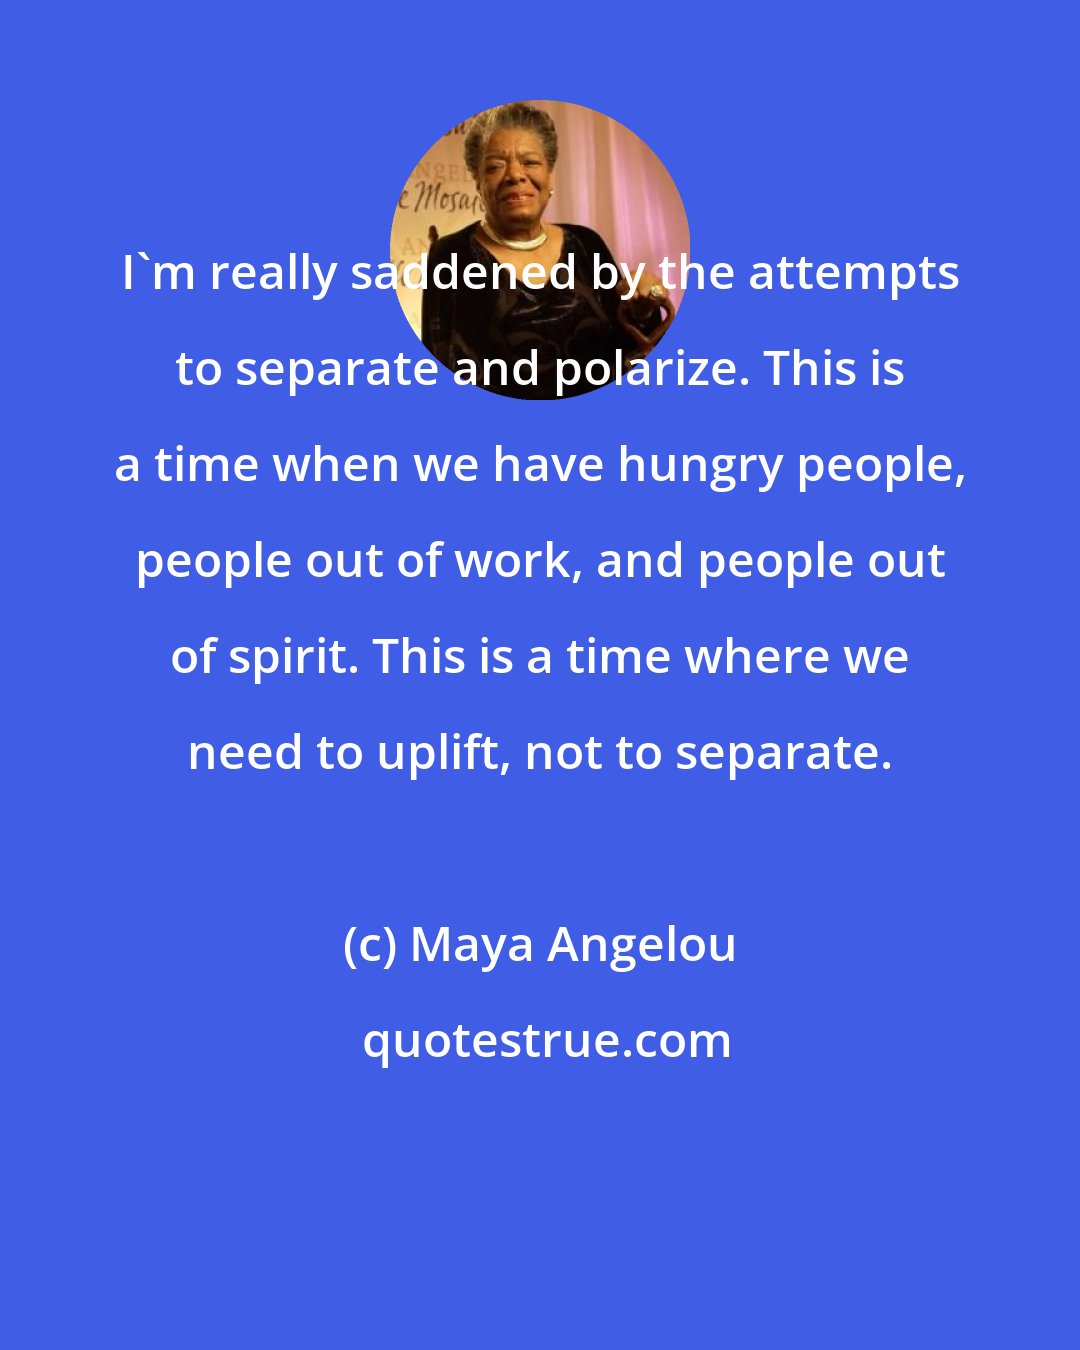 Maya Angelou: I'm really saddened by the attempts to separate and polarize. This is a time when we have hungry people, people out of work, and people out of spirit. This is a time where we need to uplift, not to separate.